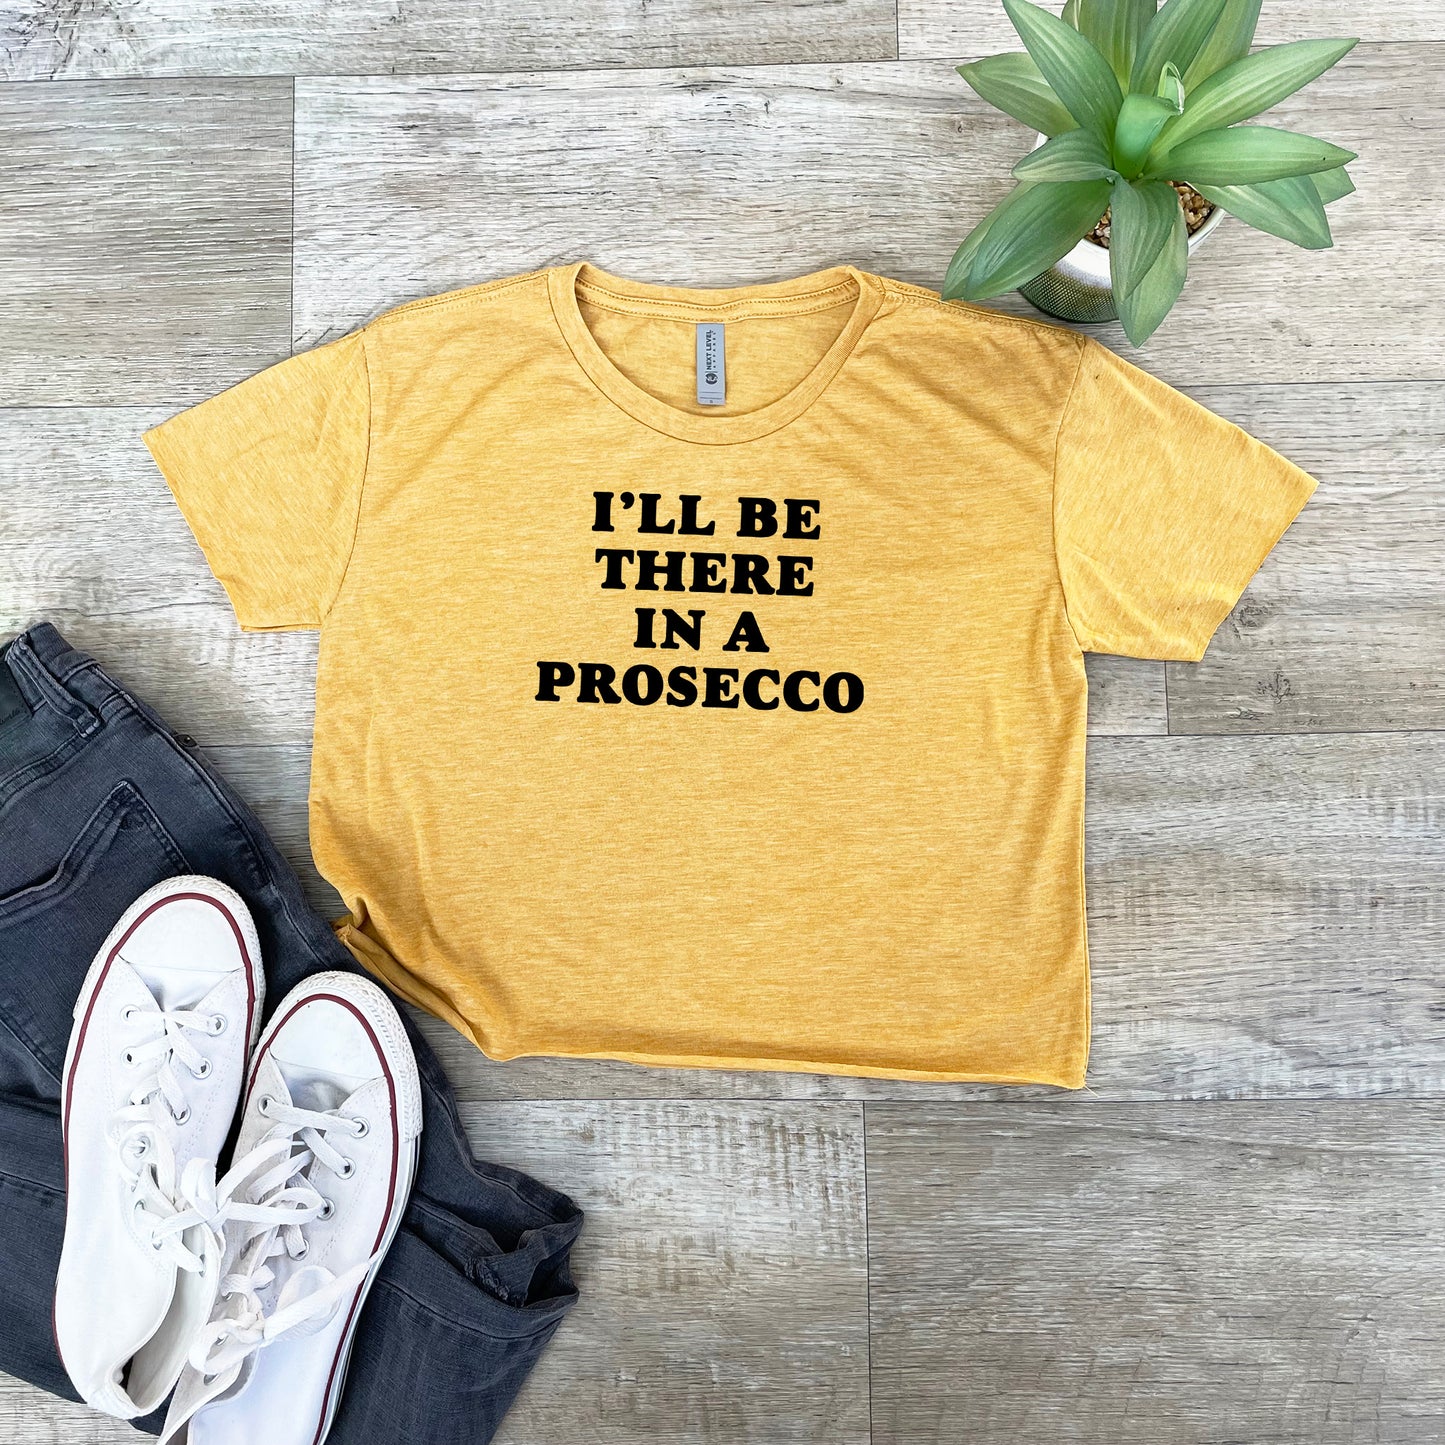 I'll Be There In a Prosecco - Bold Type - Women's Crop Tee - Heather Gray or Gold